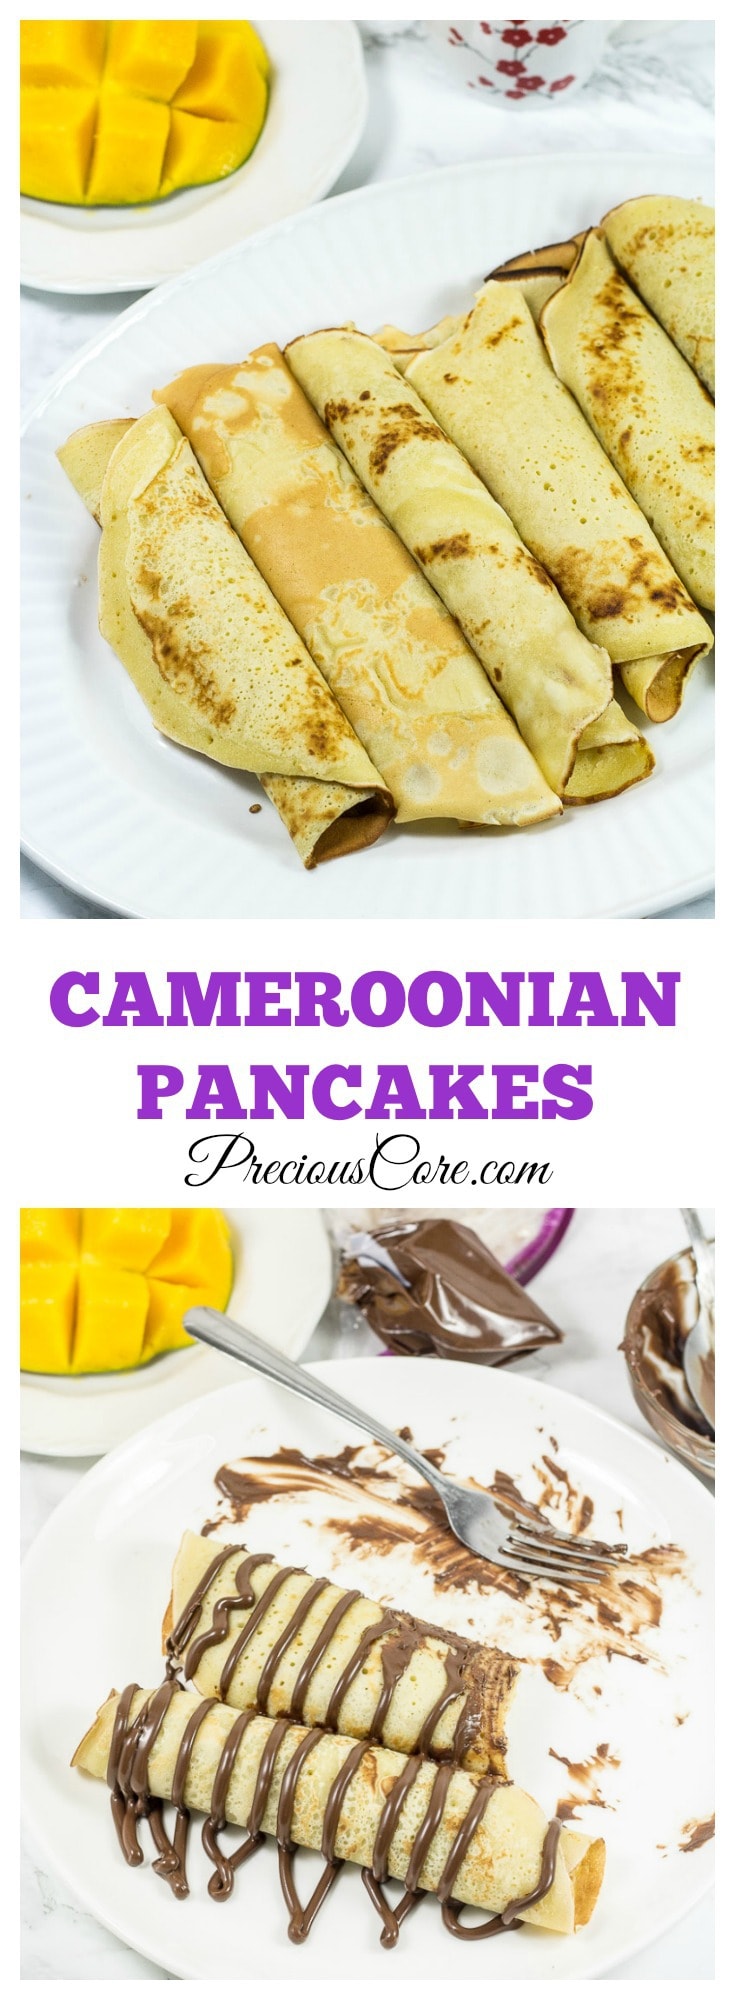  How to make Cameroonian pancakes. These Cameroonian pancakes are like crepes but slightly thicker than crepes. They come together in no time! This is the perfect breakfast recipe. Enjoy!